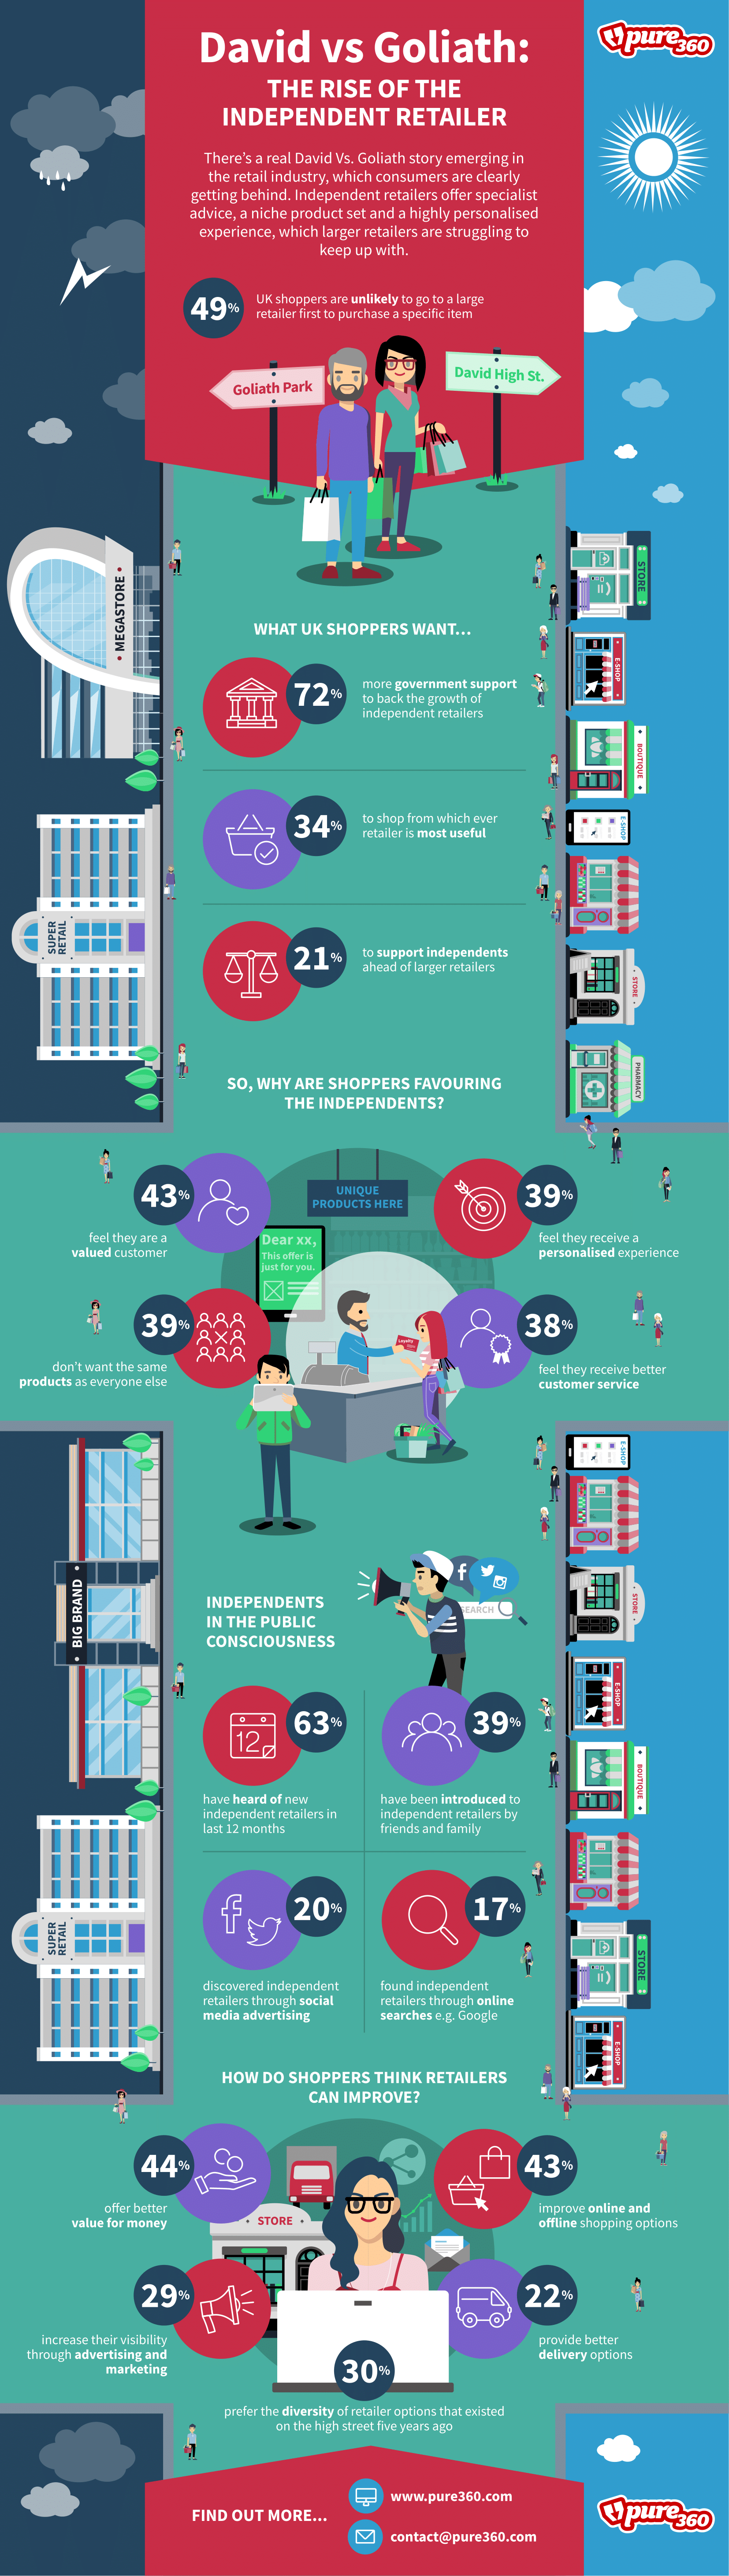 Pure360-RiseOfIndependent-Infographic